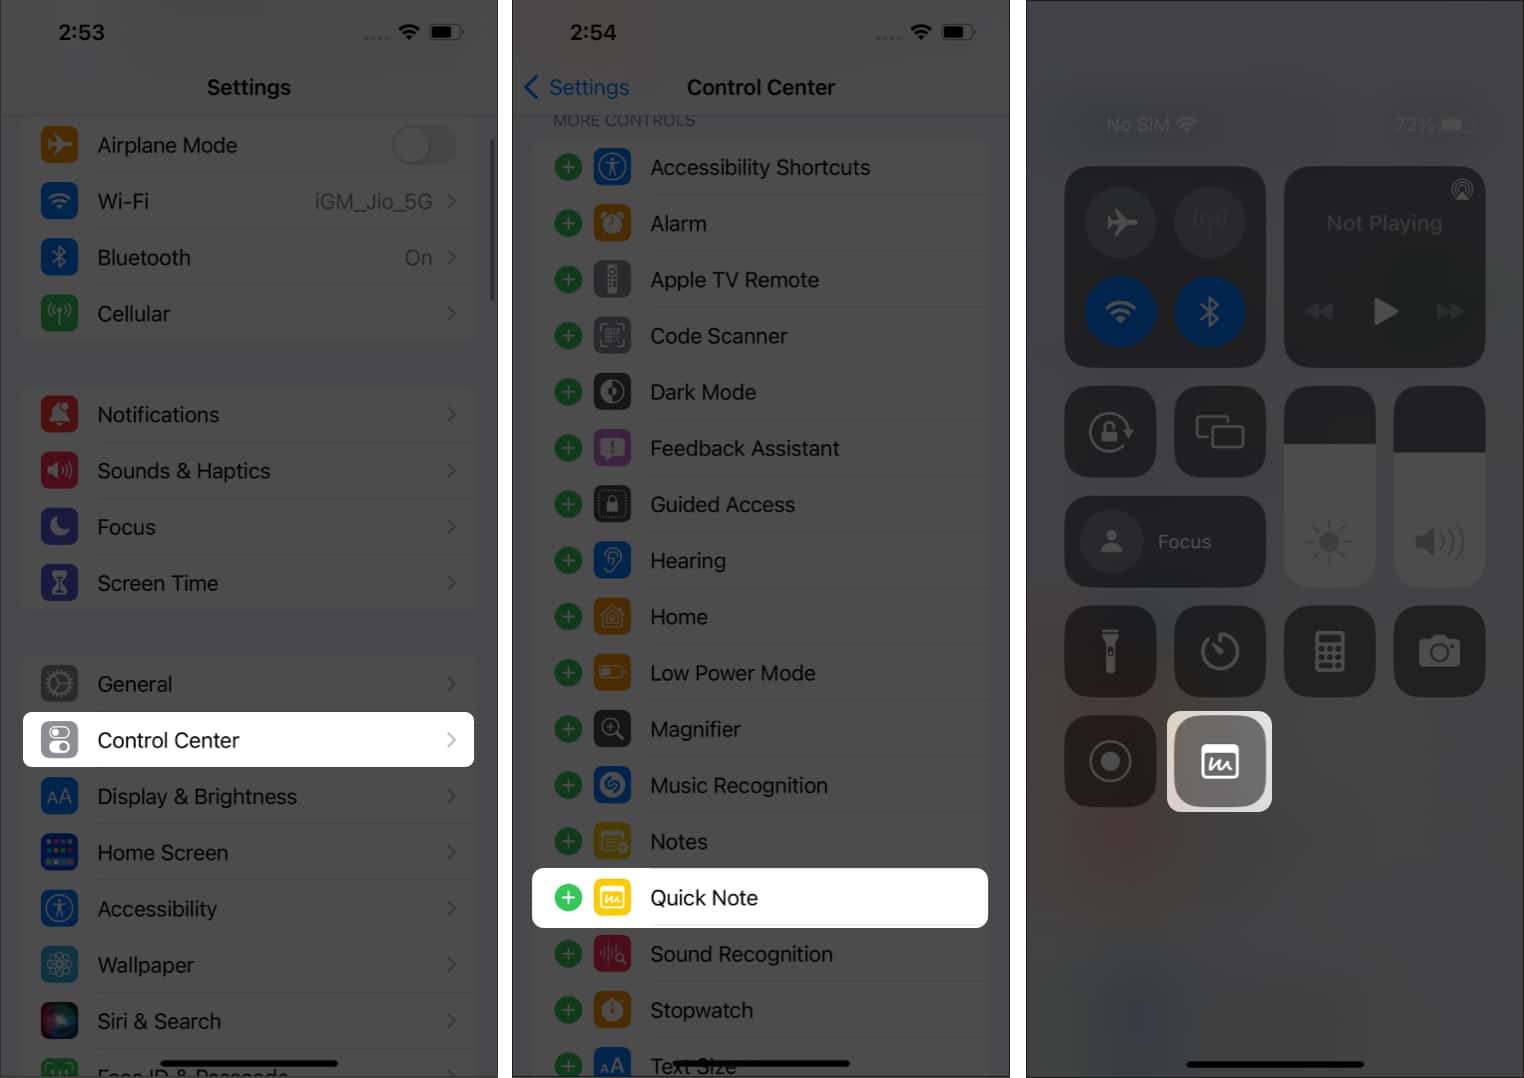 Add Quick Note to Control Centre in iOS 16